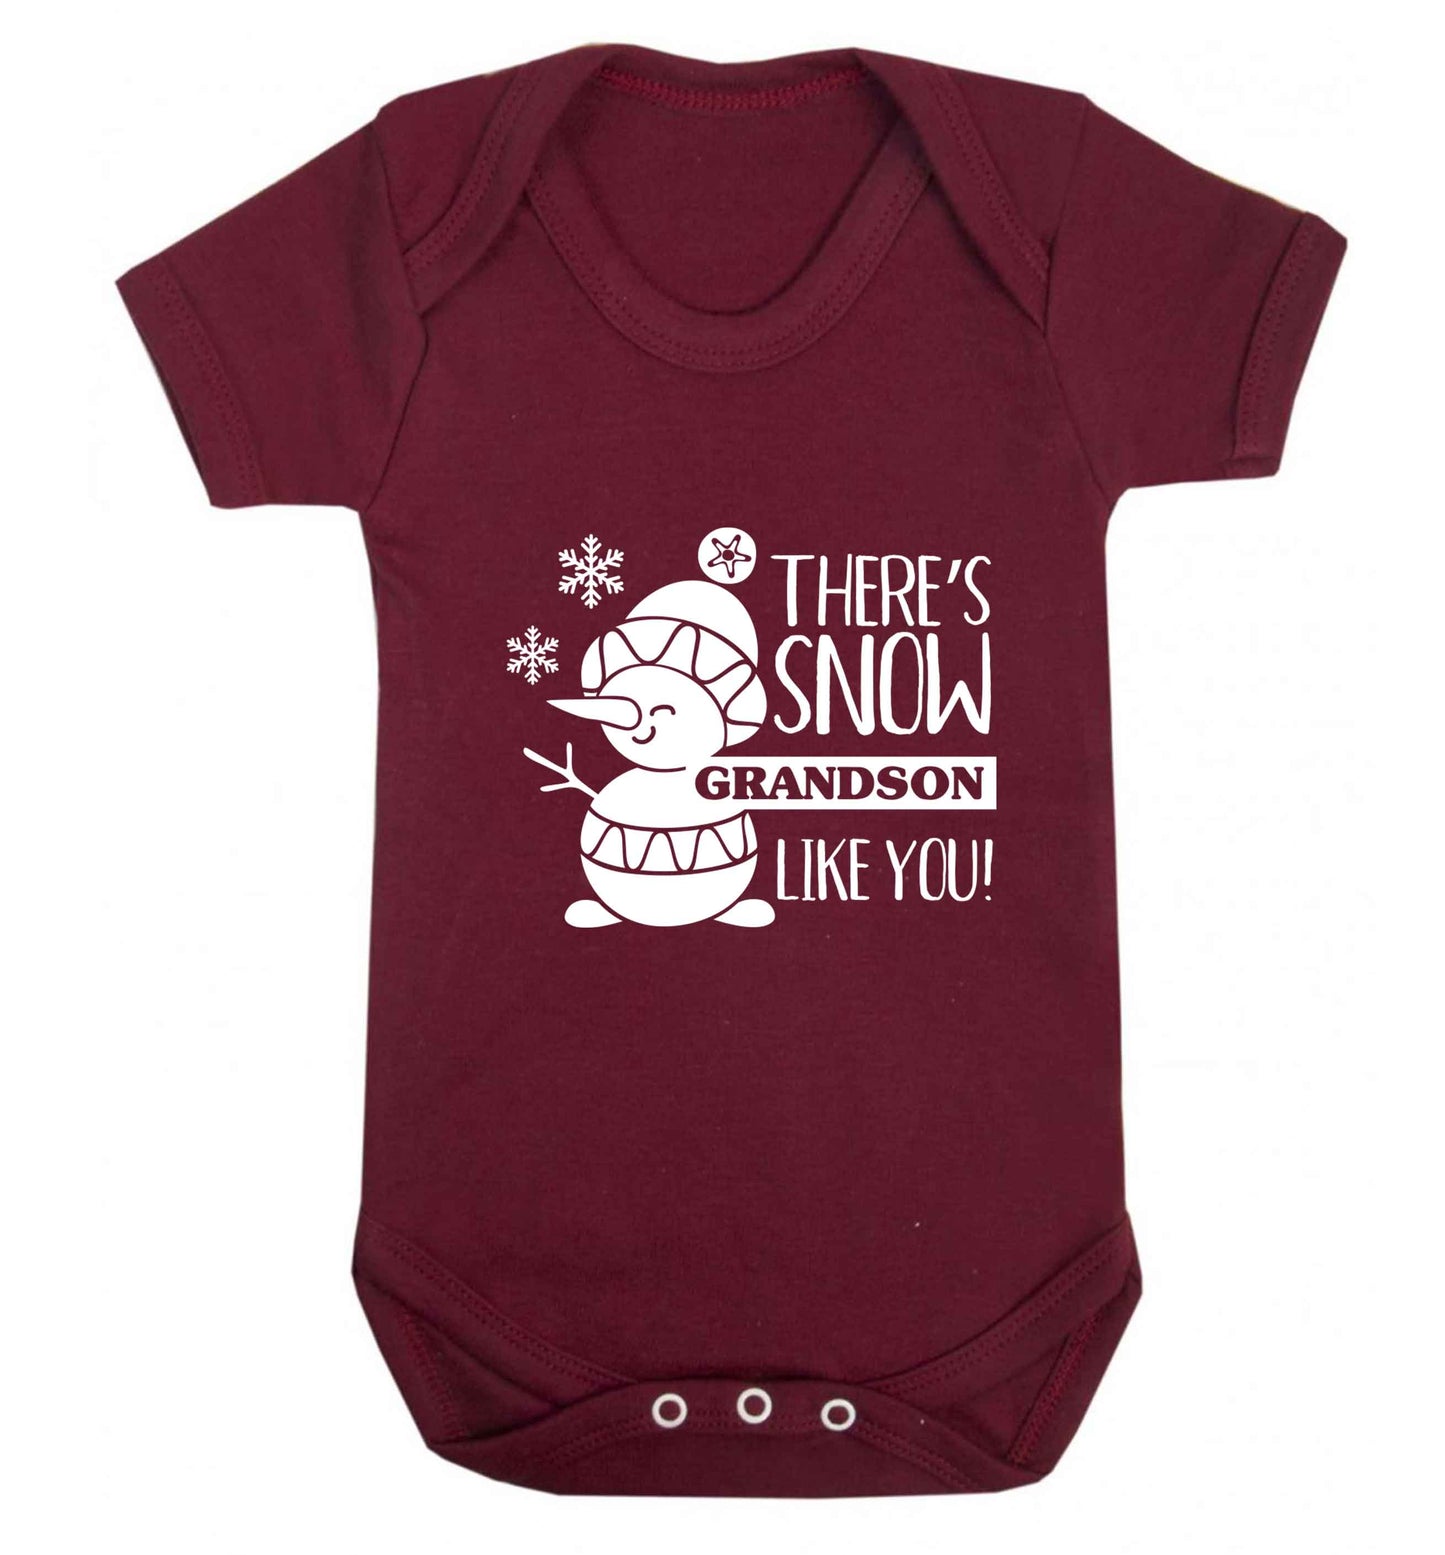 There's snow grandson like you baby vest maroon 18-24 months